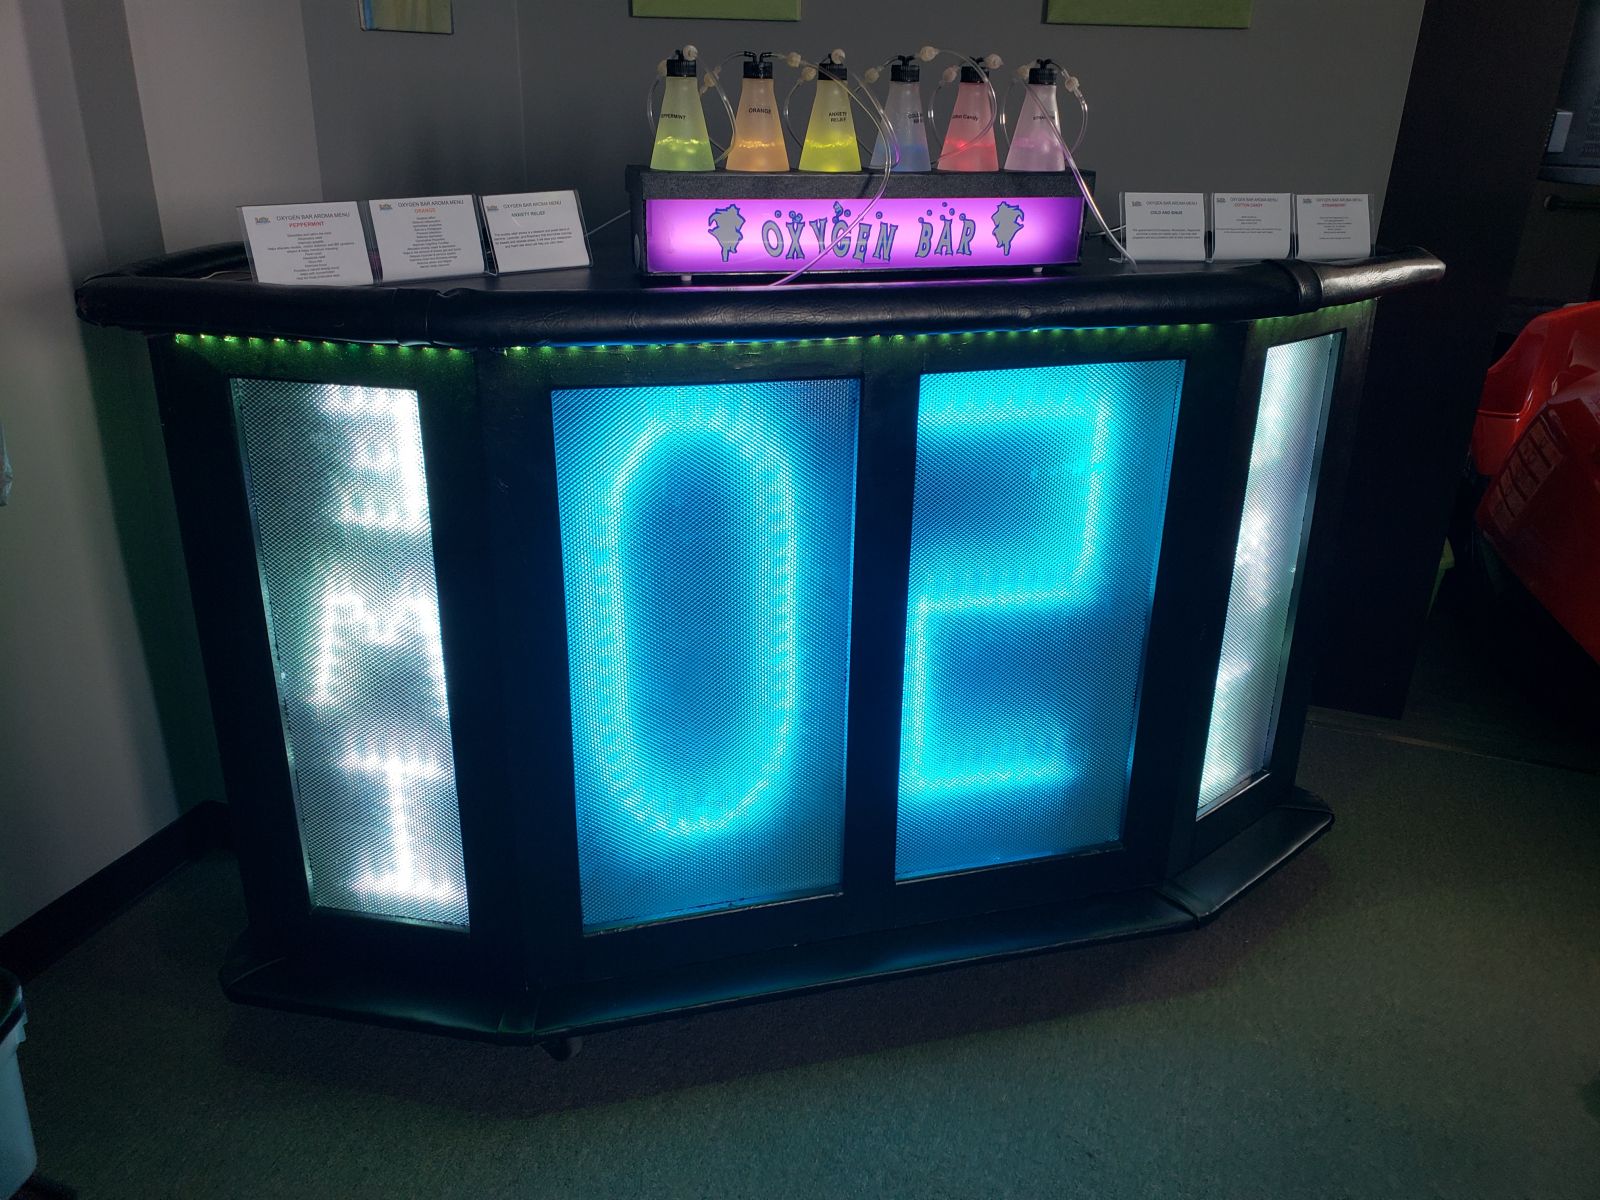 OXYGEN BAR AND AROMATHERAPY RELAXATION BAR